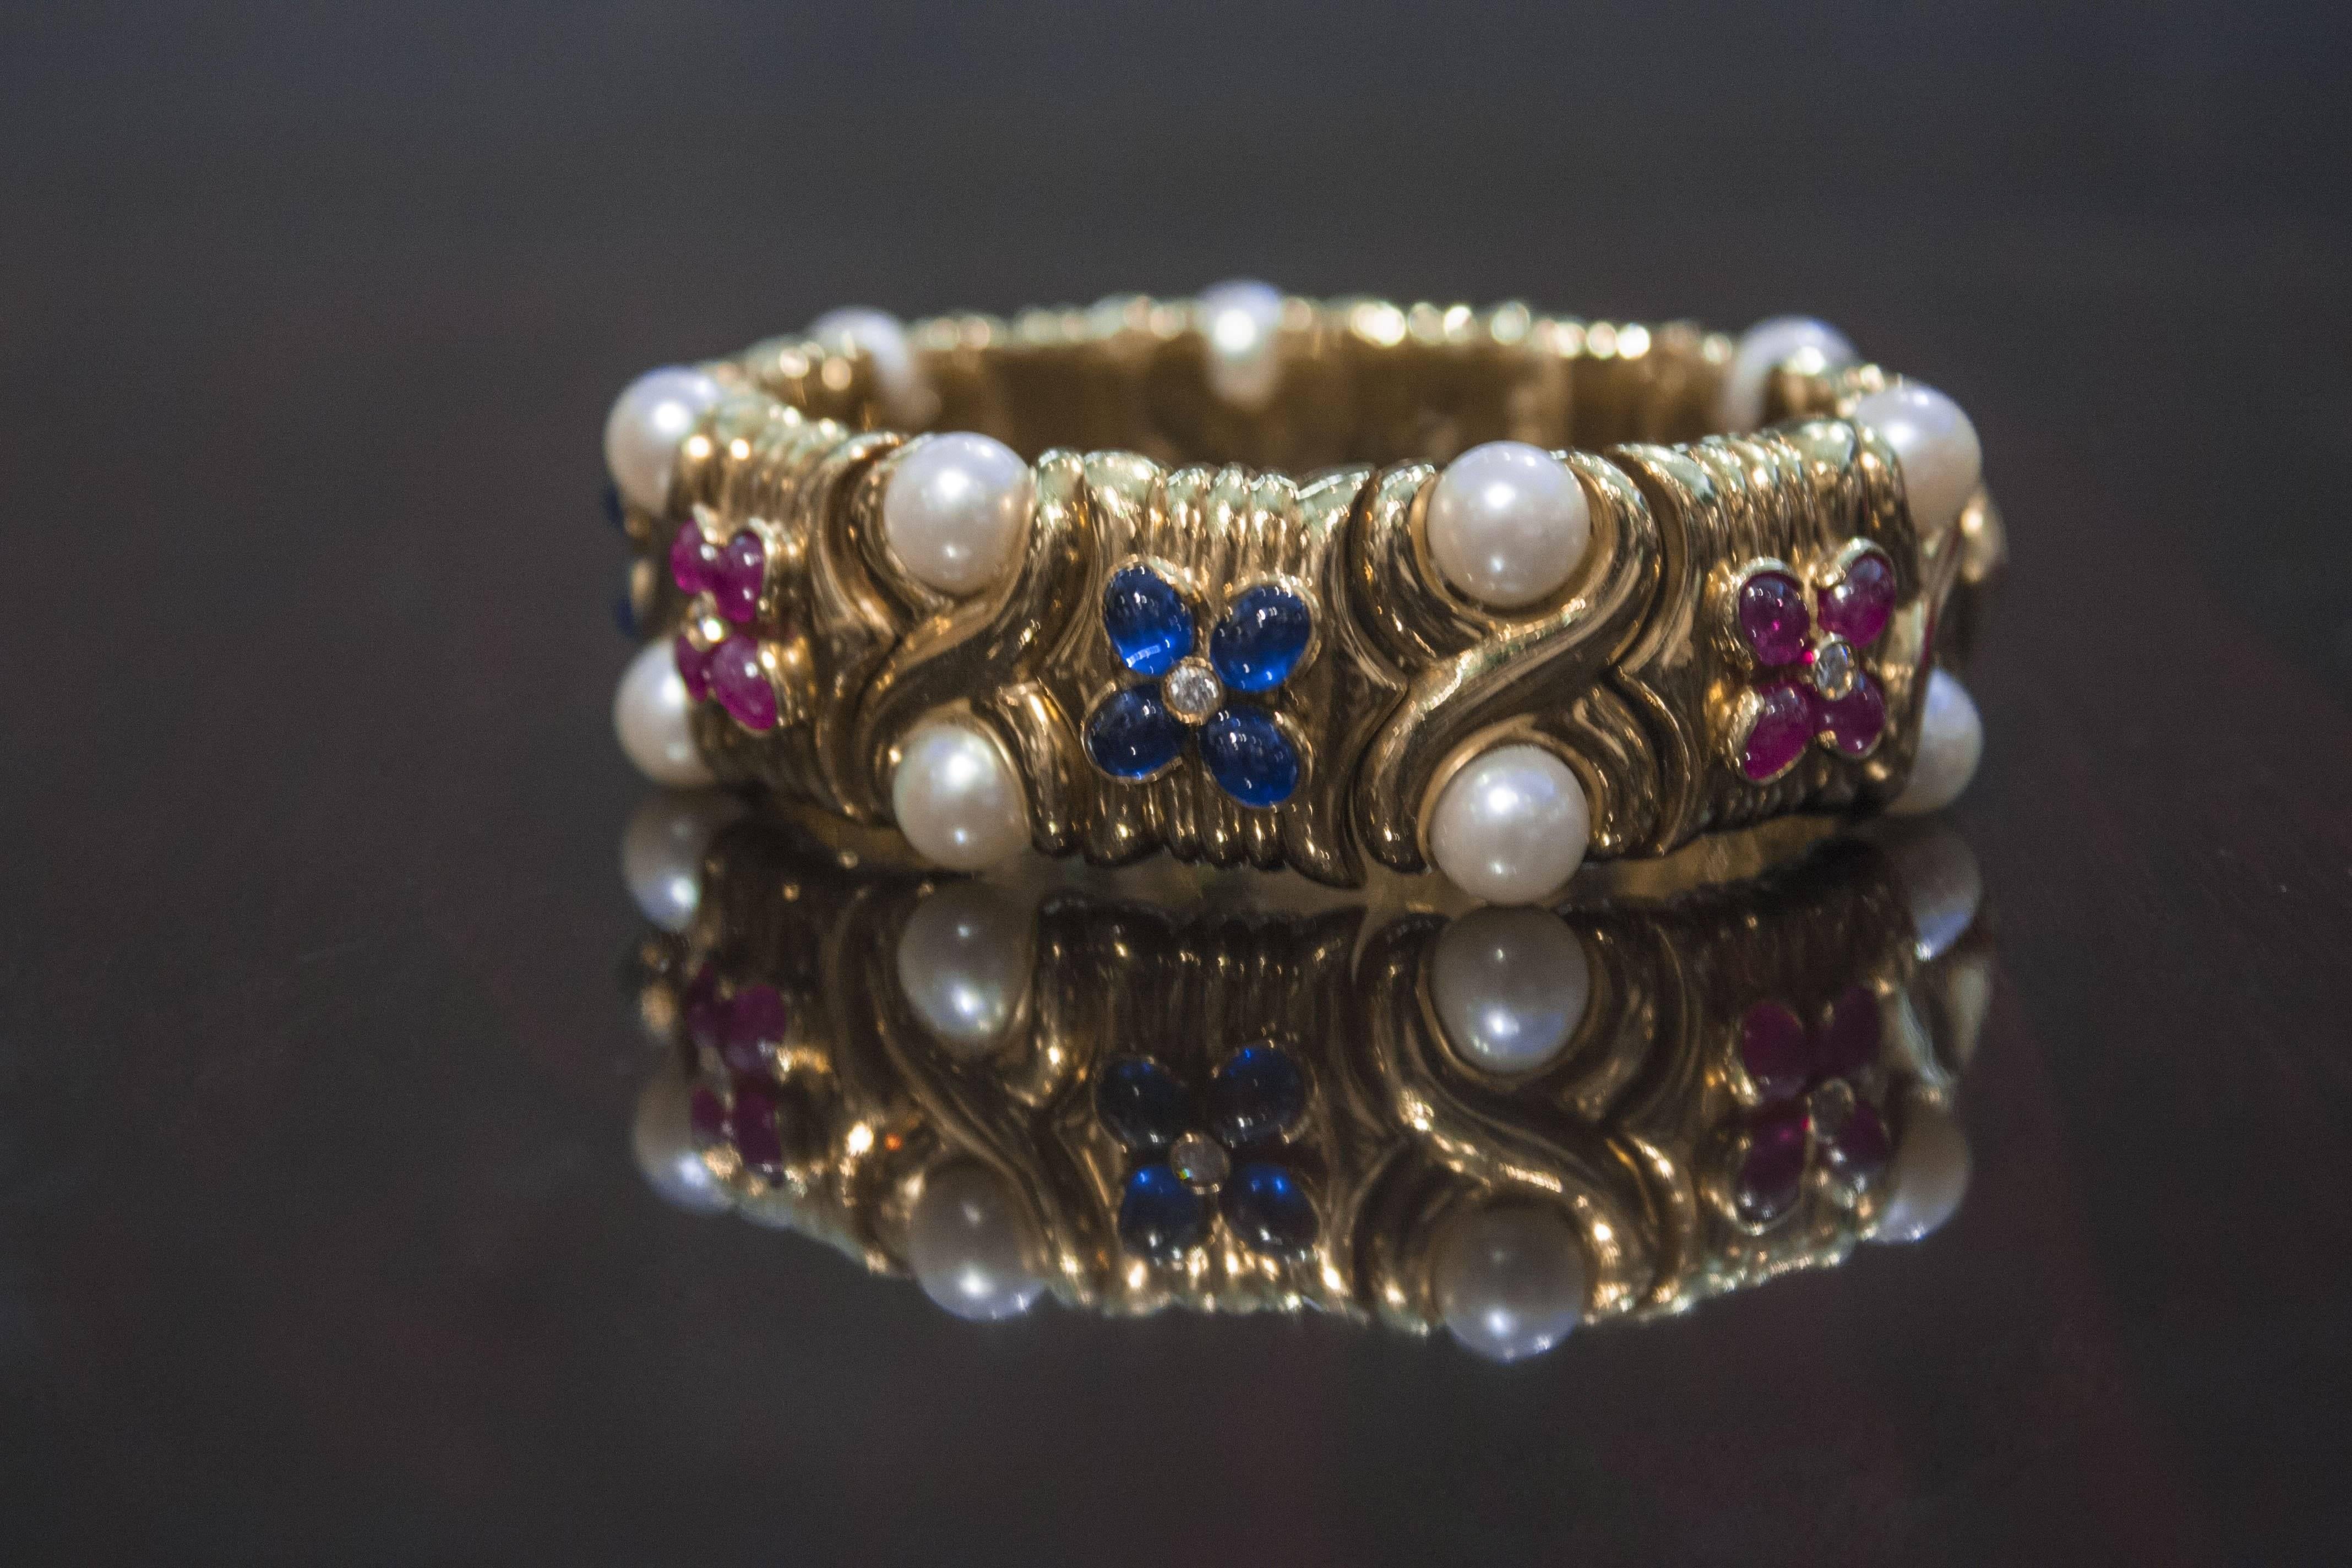 A beautiful and classic flexible 18K yellow gold cuff bangle set with pearls, sapphires and rubies by Bulgari, circa 1980's. 

The bracelet masterfully worked in 18k gold with flexible links and set with pearls, rubies and sapphires. The rubies and